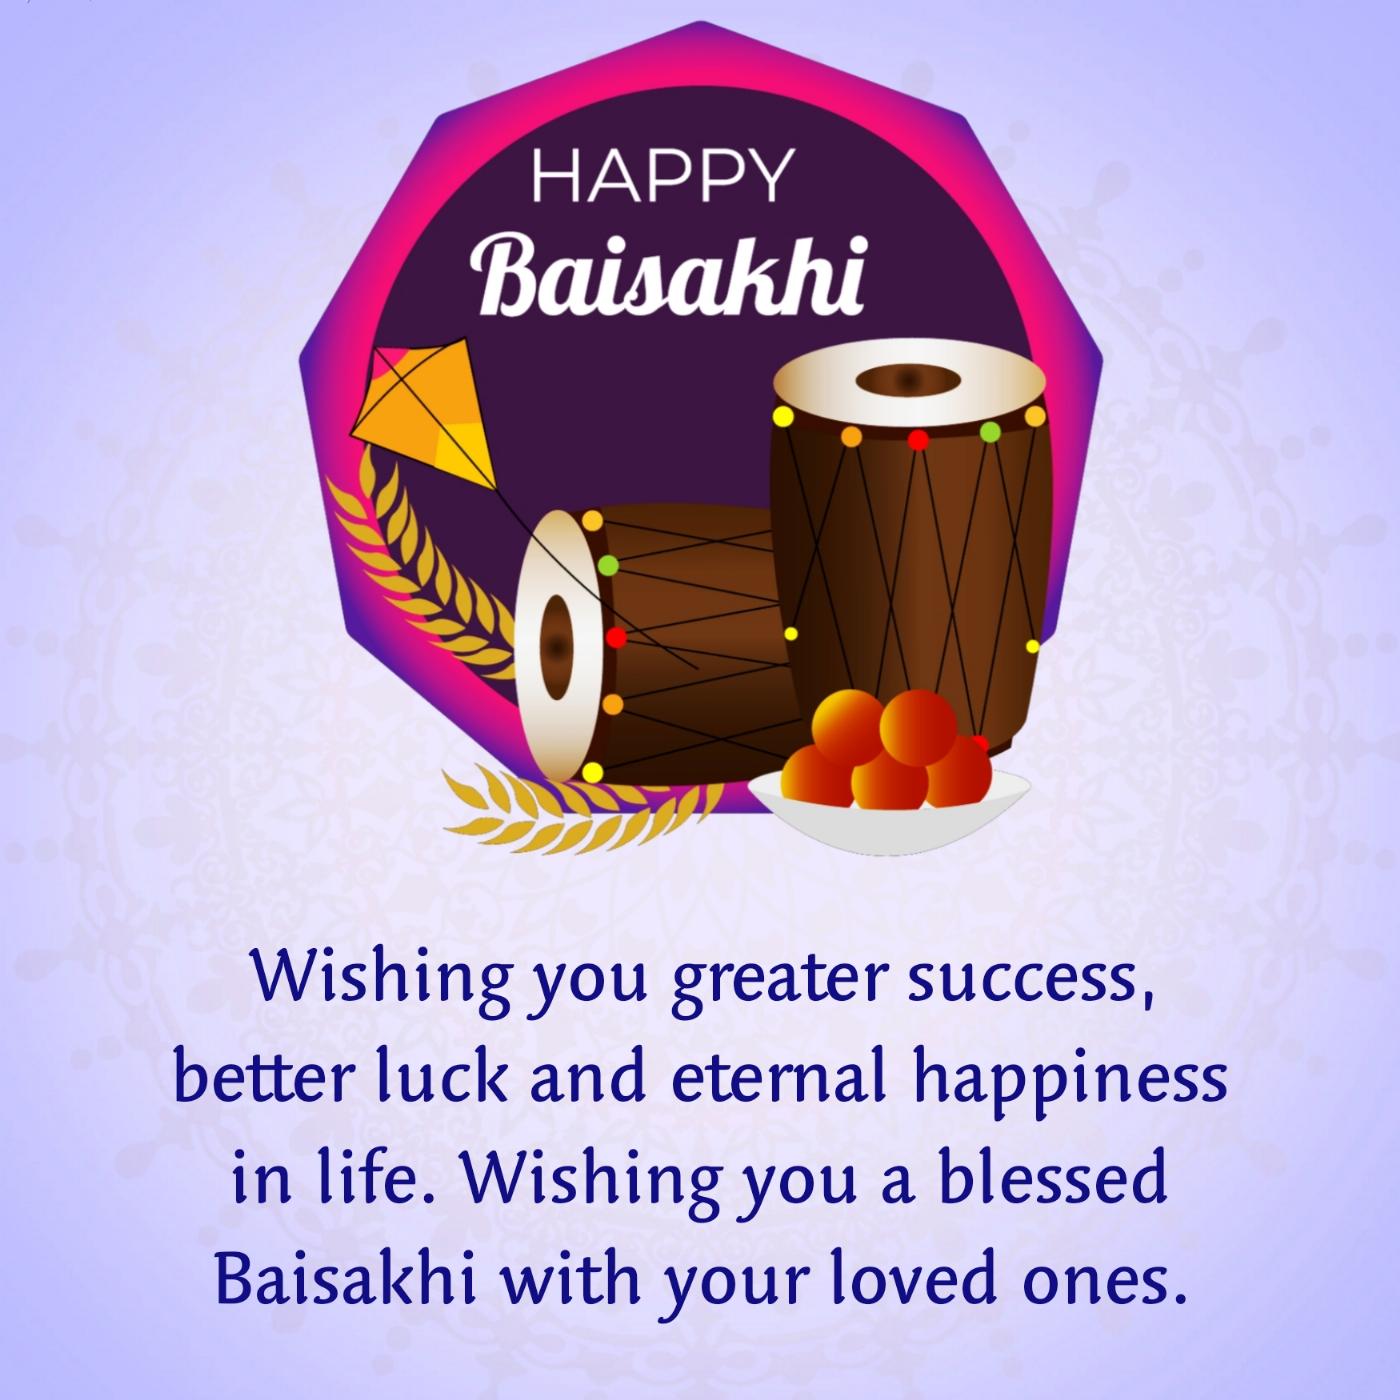 Wishing you greater success better luck and eternal happiness